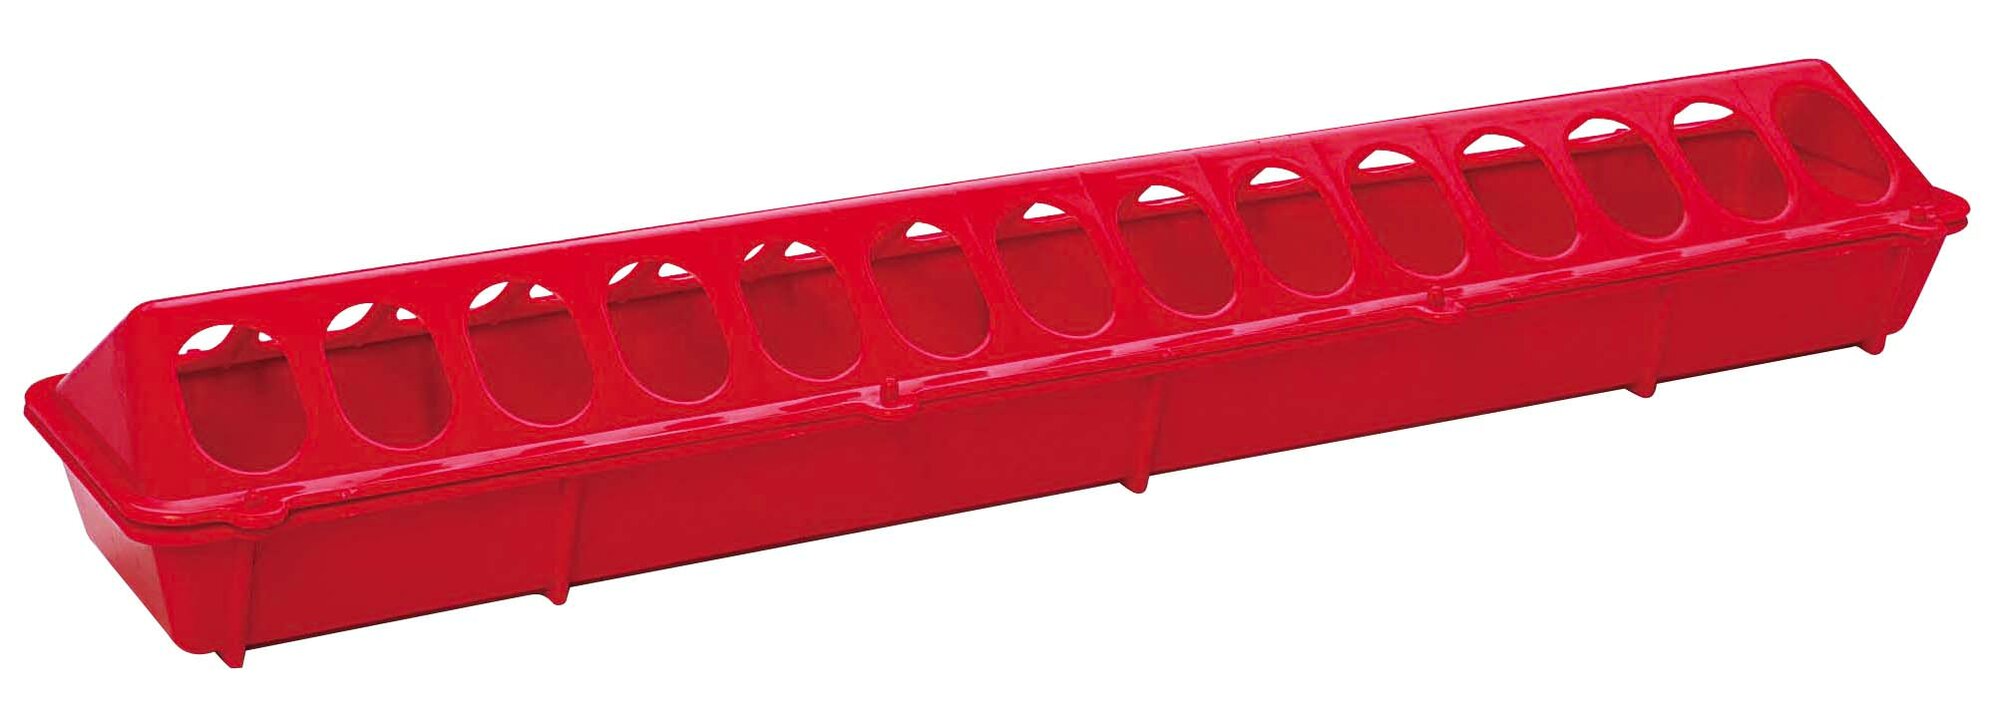 Little Giant Trough Poultry Feeder